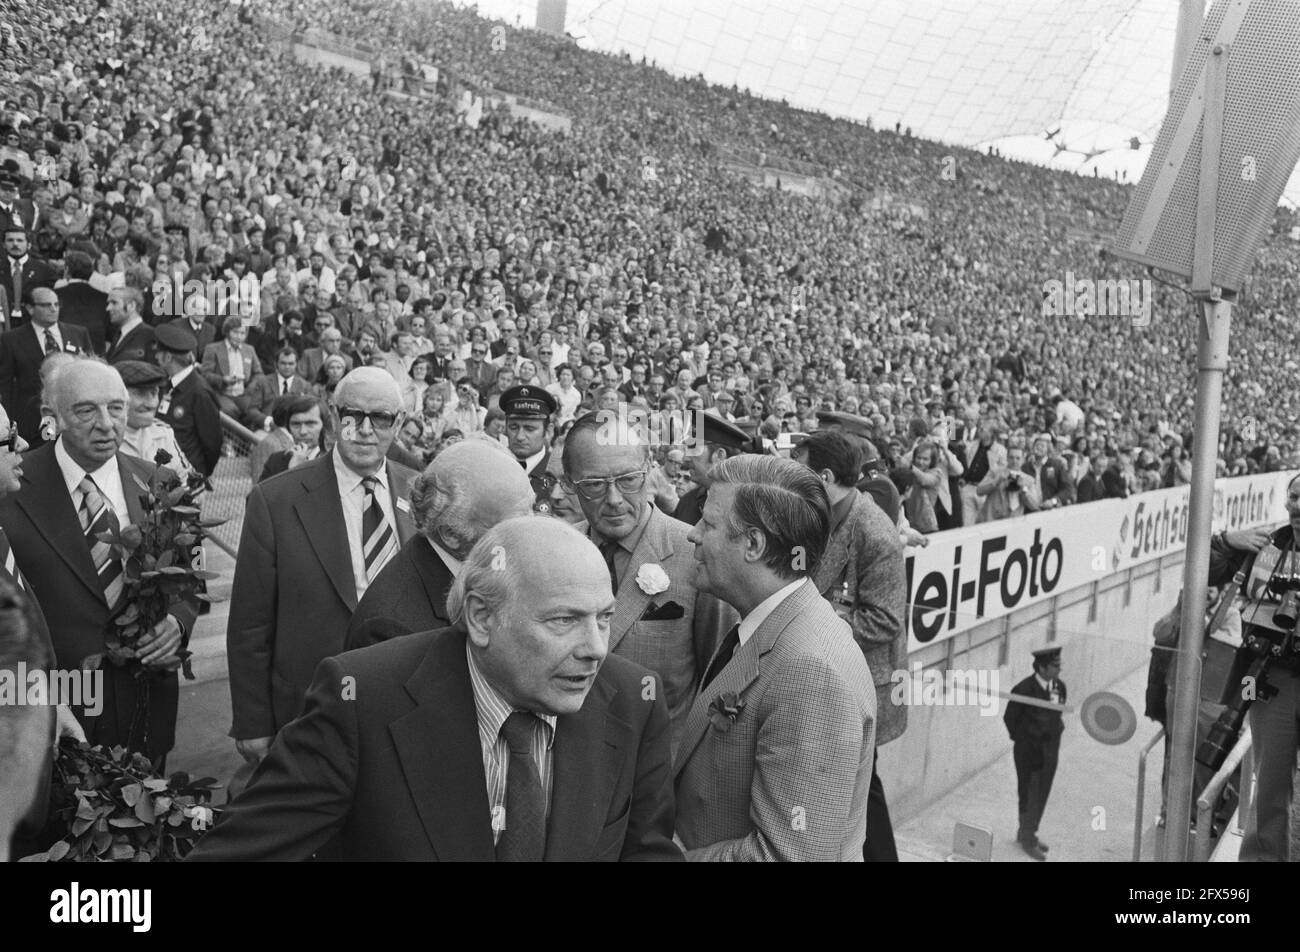 World Cup final 1974 in Munich, West Germany v Netherlands 2-1; players enter the field, July 7, 1974, finals, sports, soccer, world championships, The Netherlands, 20th century press agency photo, news to remember, documentary, historic photography 1945-1990, visual stories, human history of the Twentieth Century, capturing moments in time Stock Photo